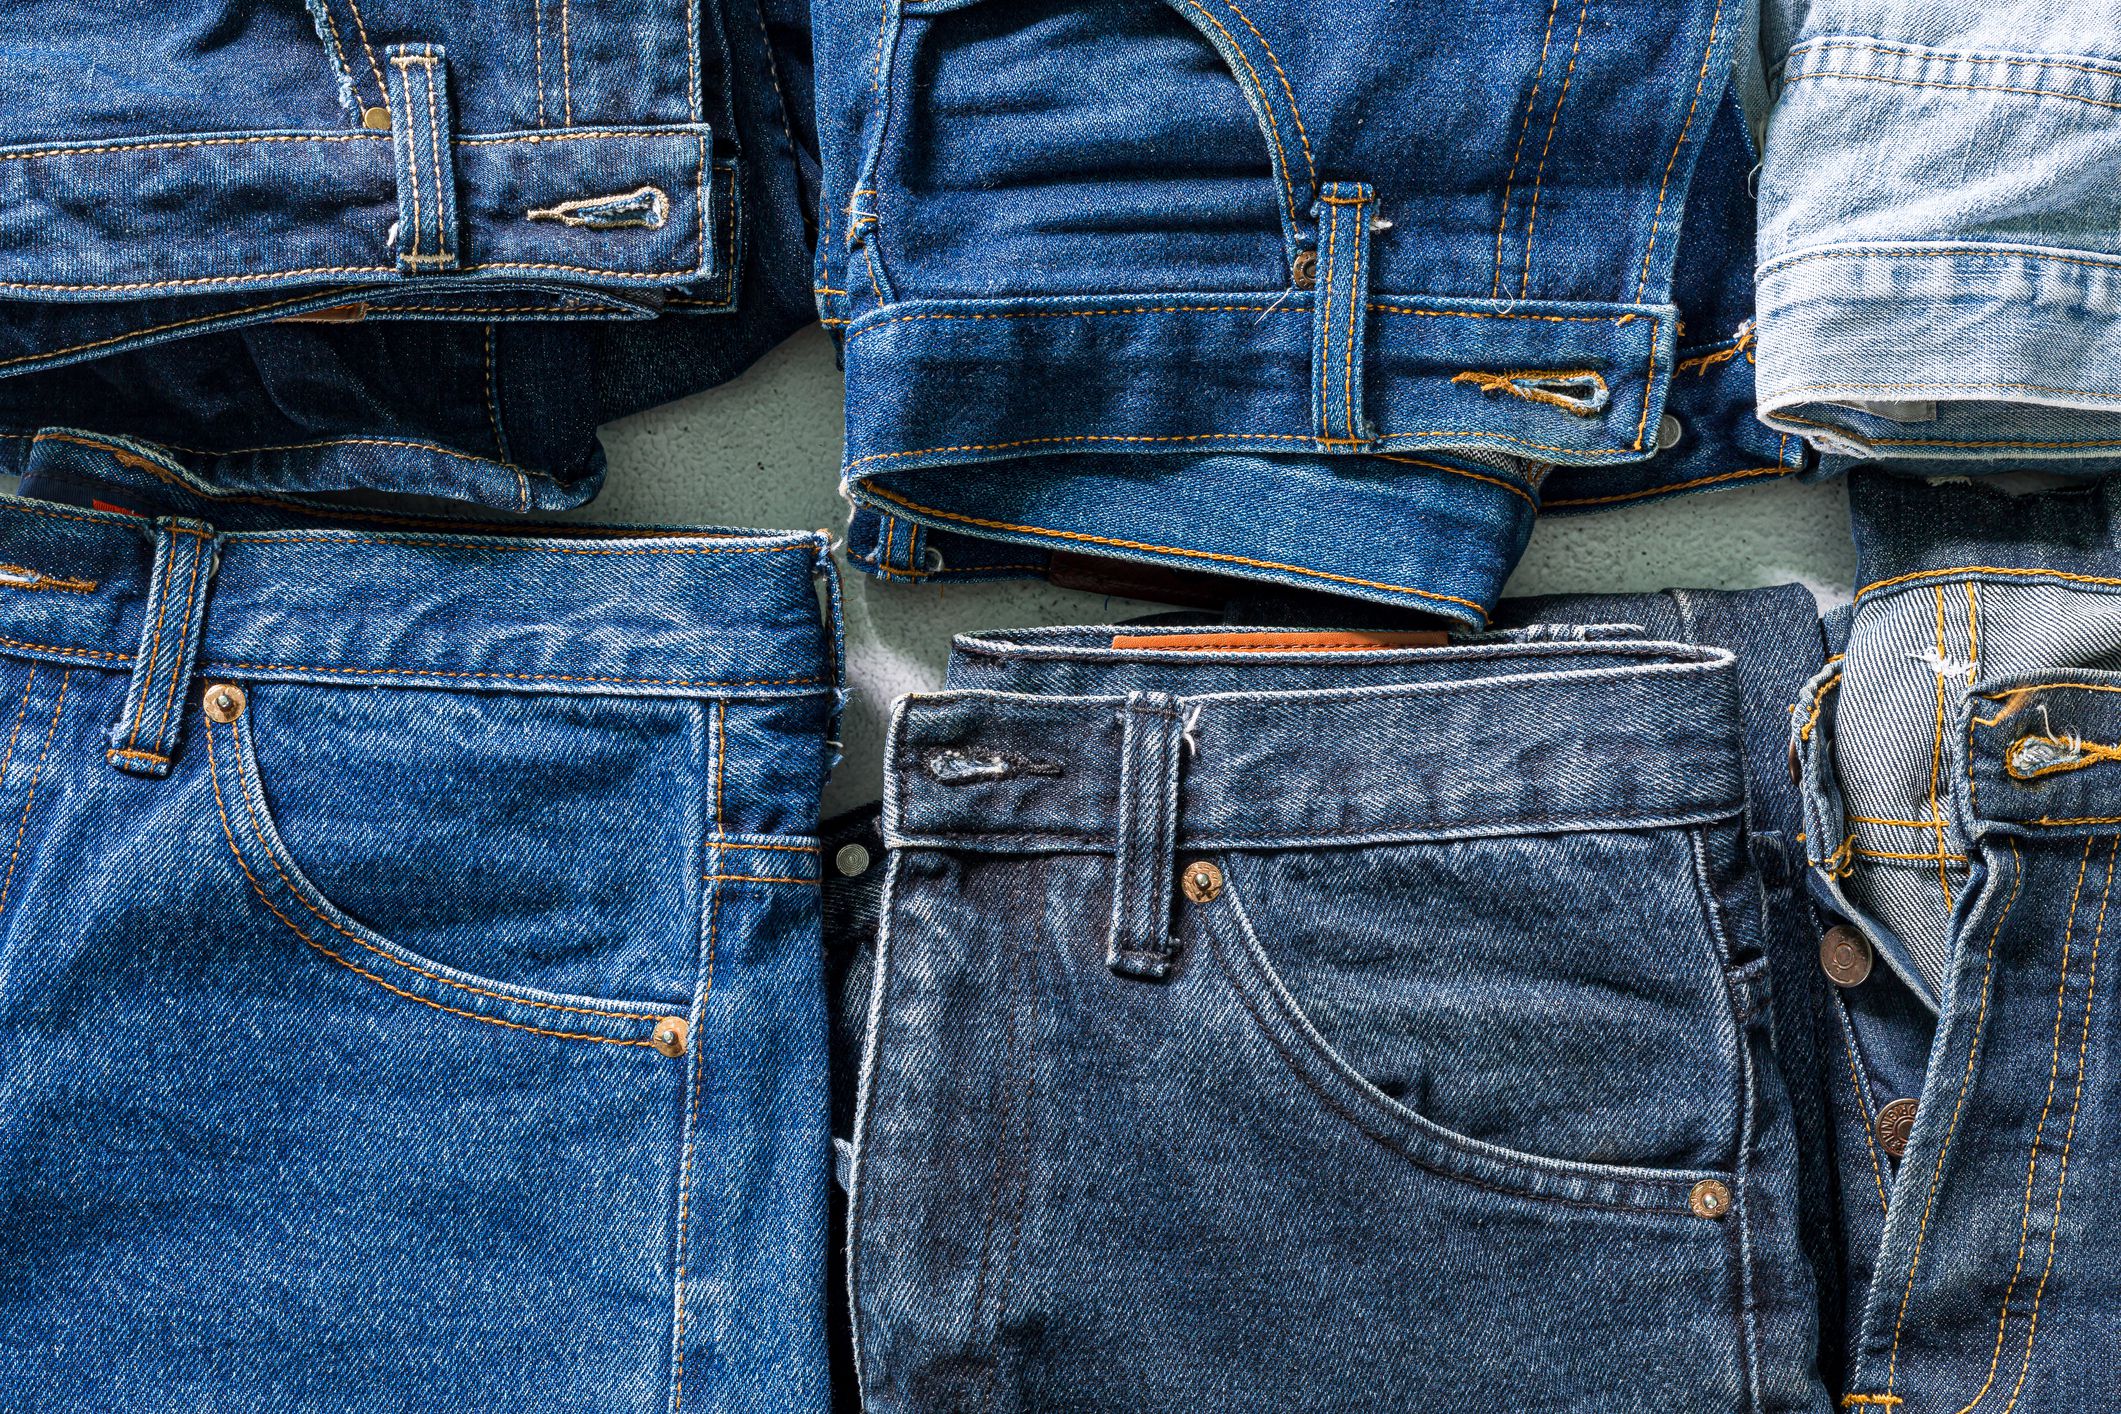 Shop With Pride: These 10 Denim Brands Are Made in America